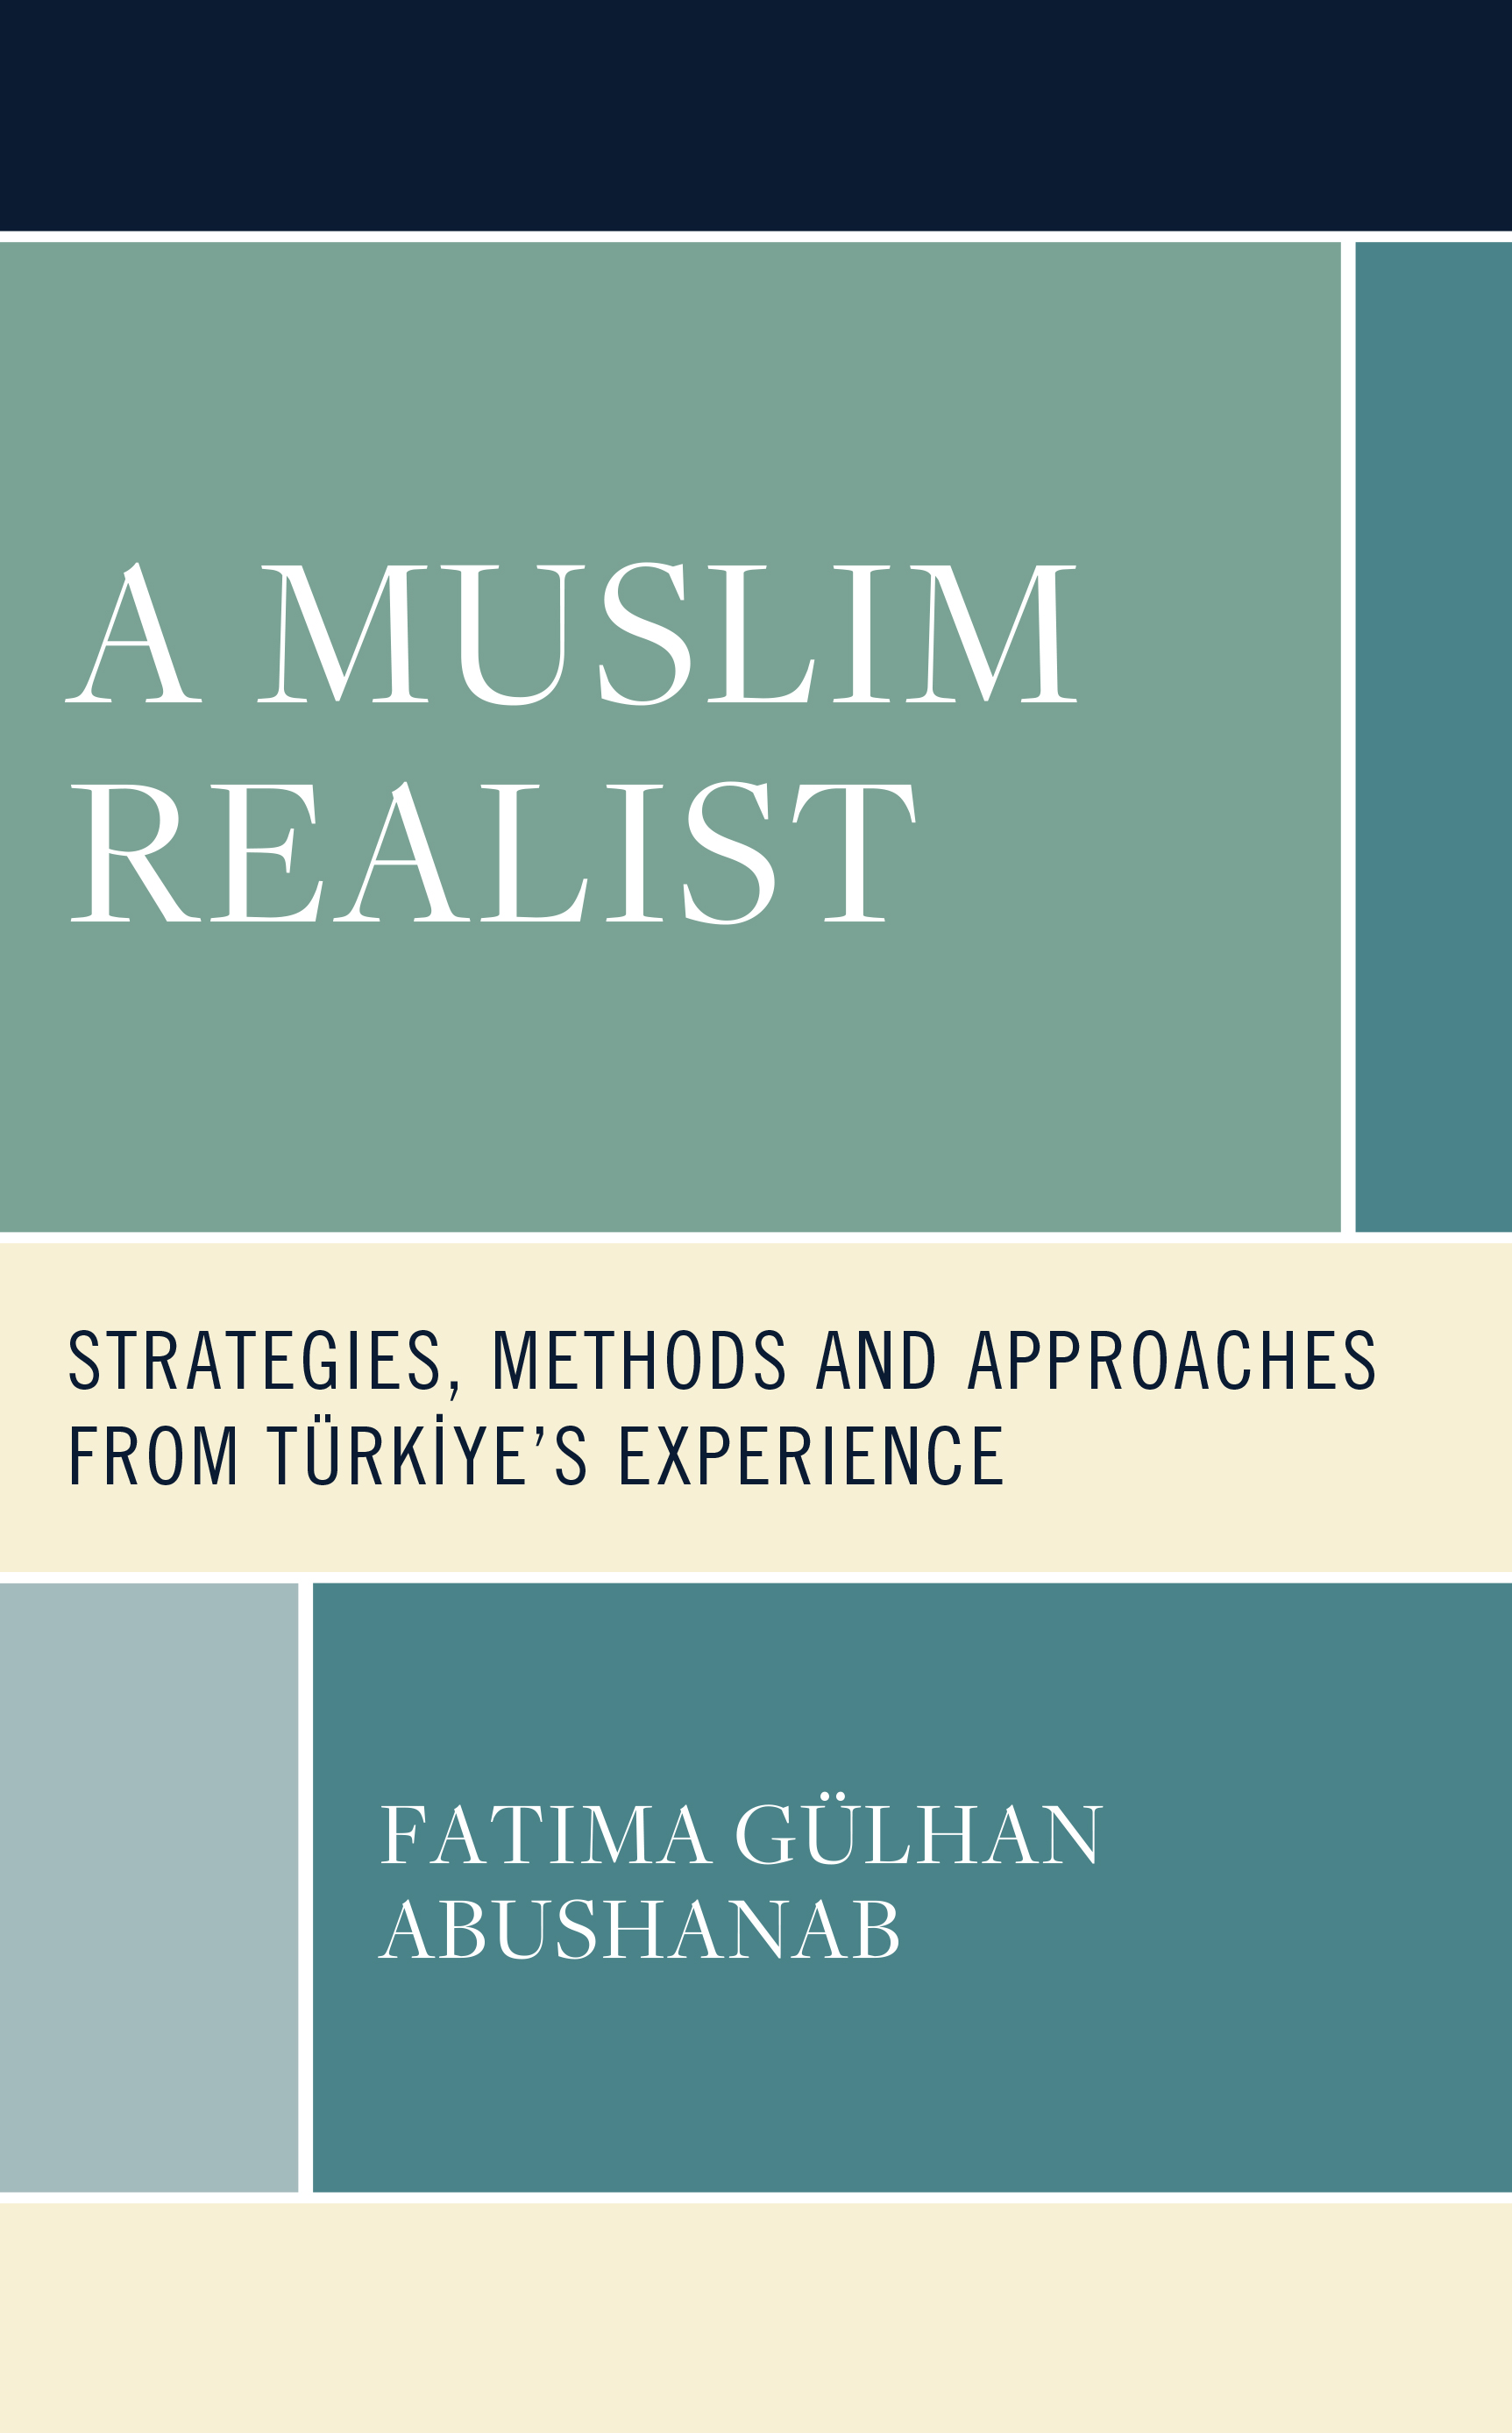 A Muslim Realist: Strategies, Methods and Approaches from Türkiye's Experience